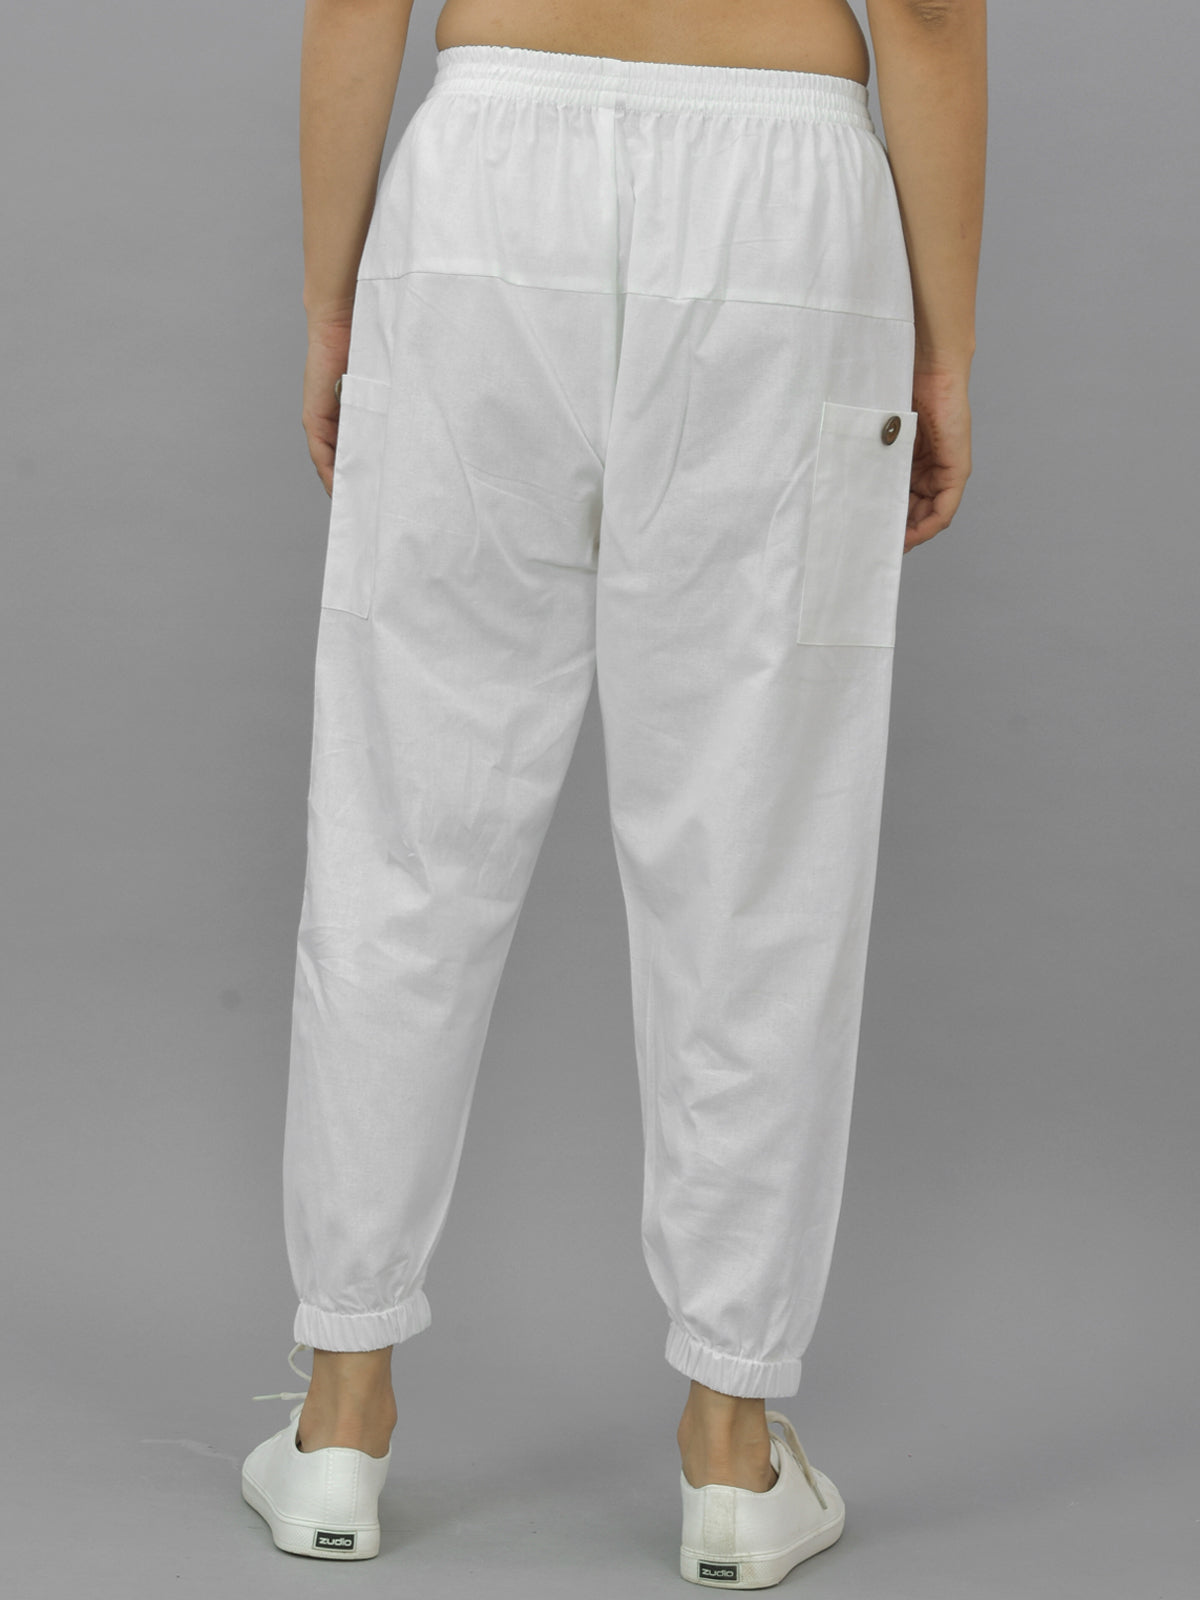 Combo Pack Of Womens Black And White Four Pocket Cotton Cargo Pants